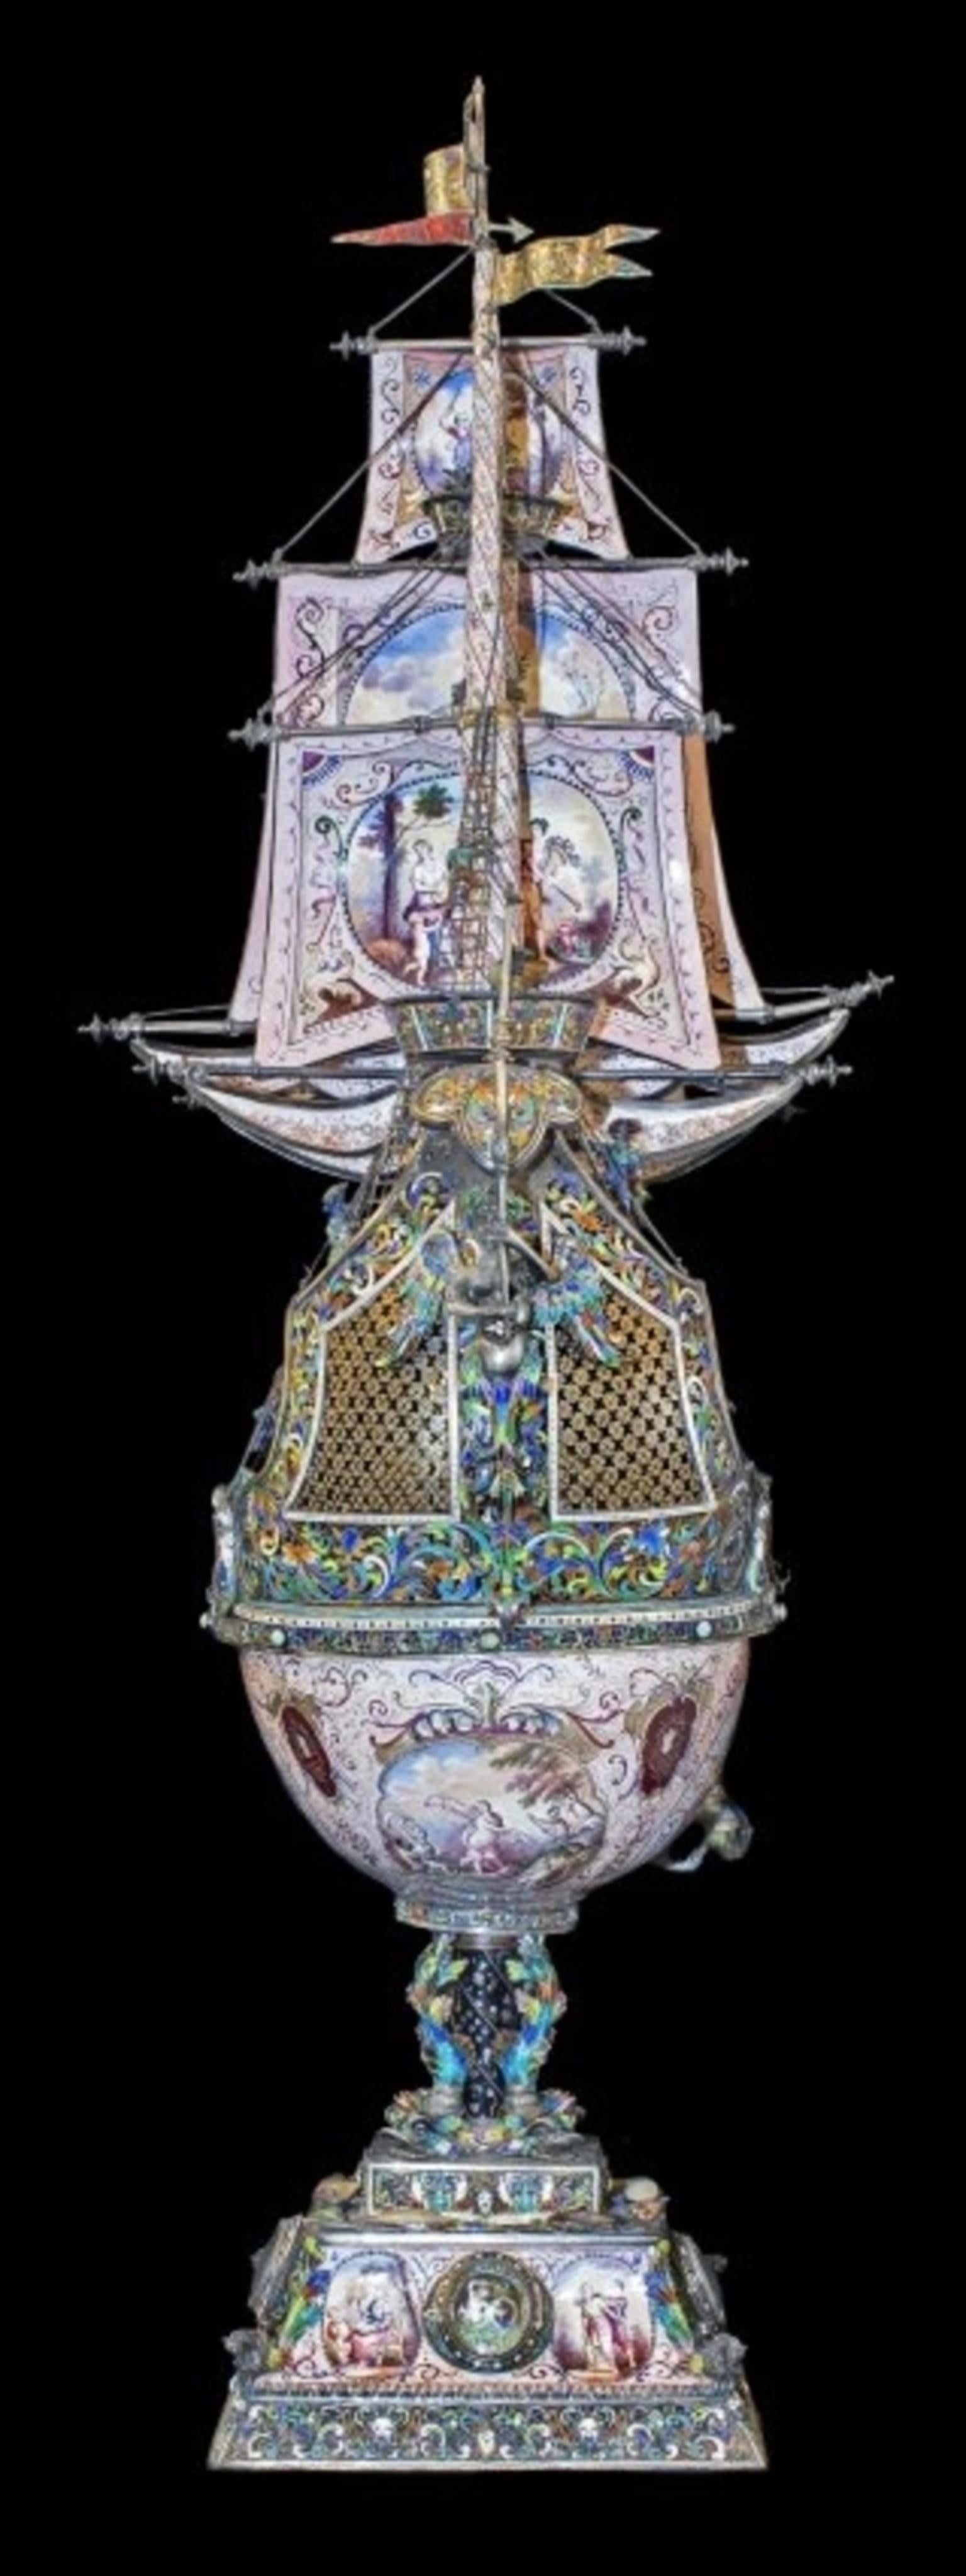 Important and extremely fine Herman Bohm Viennese silver and enamel Jewelled nef,
circa 1890. Stamped HB for Herman Bohm and Austrian control marks.
In two parts, the interior base of the vessel and the sails painted with allegorical